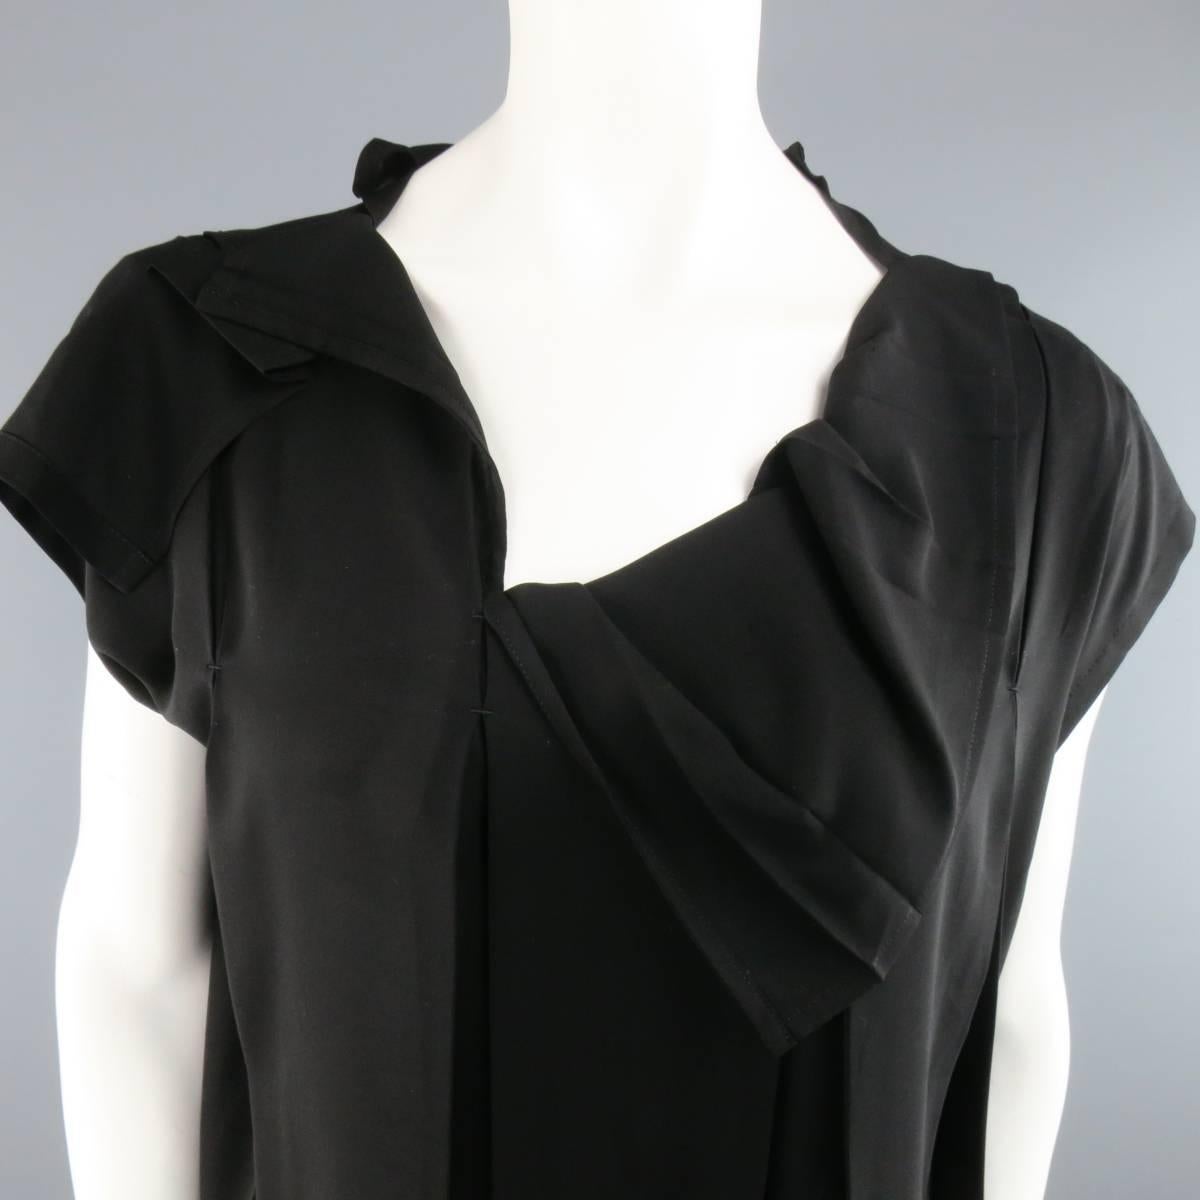 ISSEY MIYAKE black chiffon blouse features asymmetrical pleating details throughout and mock cap sleeves. Made in Japan.
 
Excellent Pre-Owned Condition.
Marked: 3
 
Measurements:
 
Shoulders: 35 In.
Bust: 49 In.
Length: 25 In.